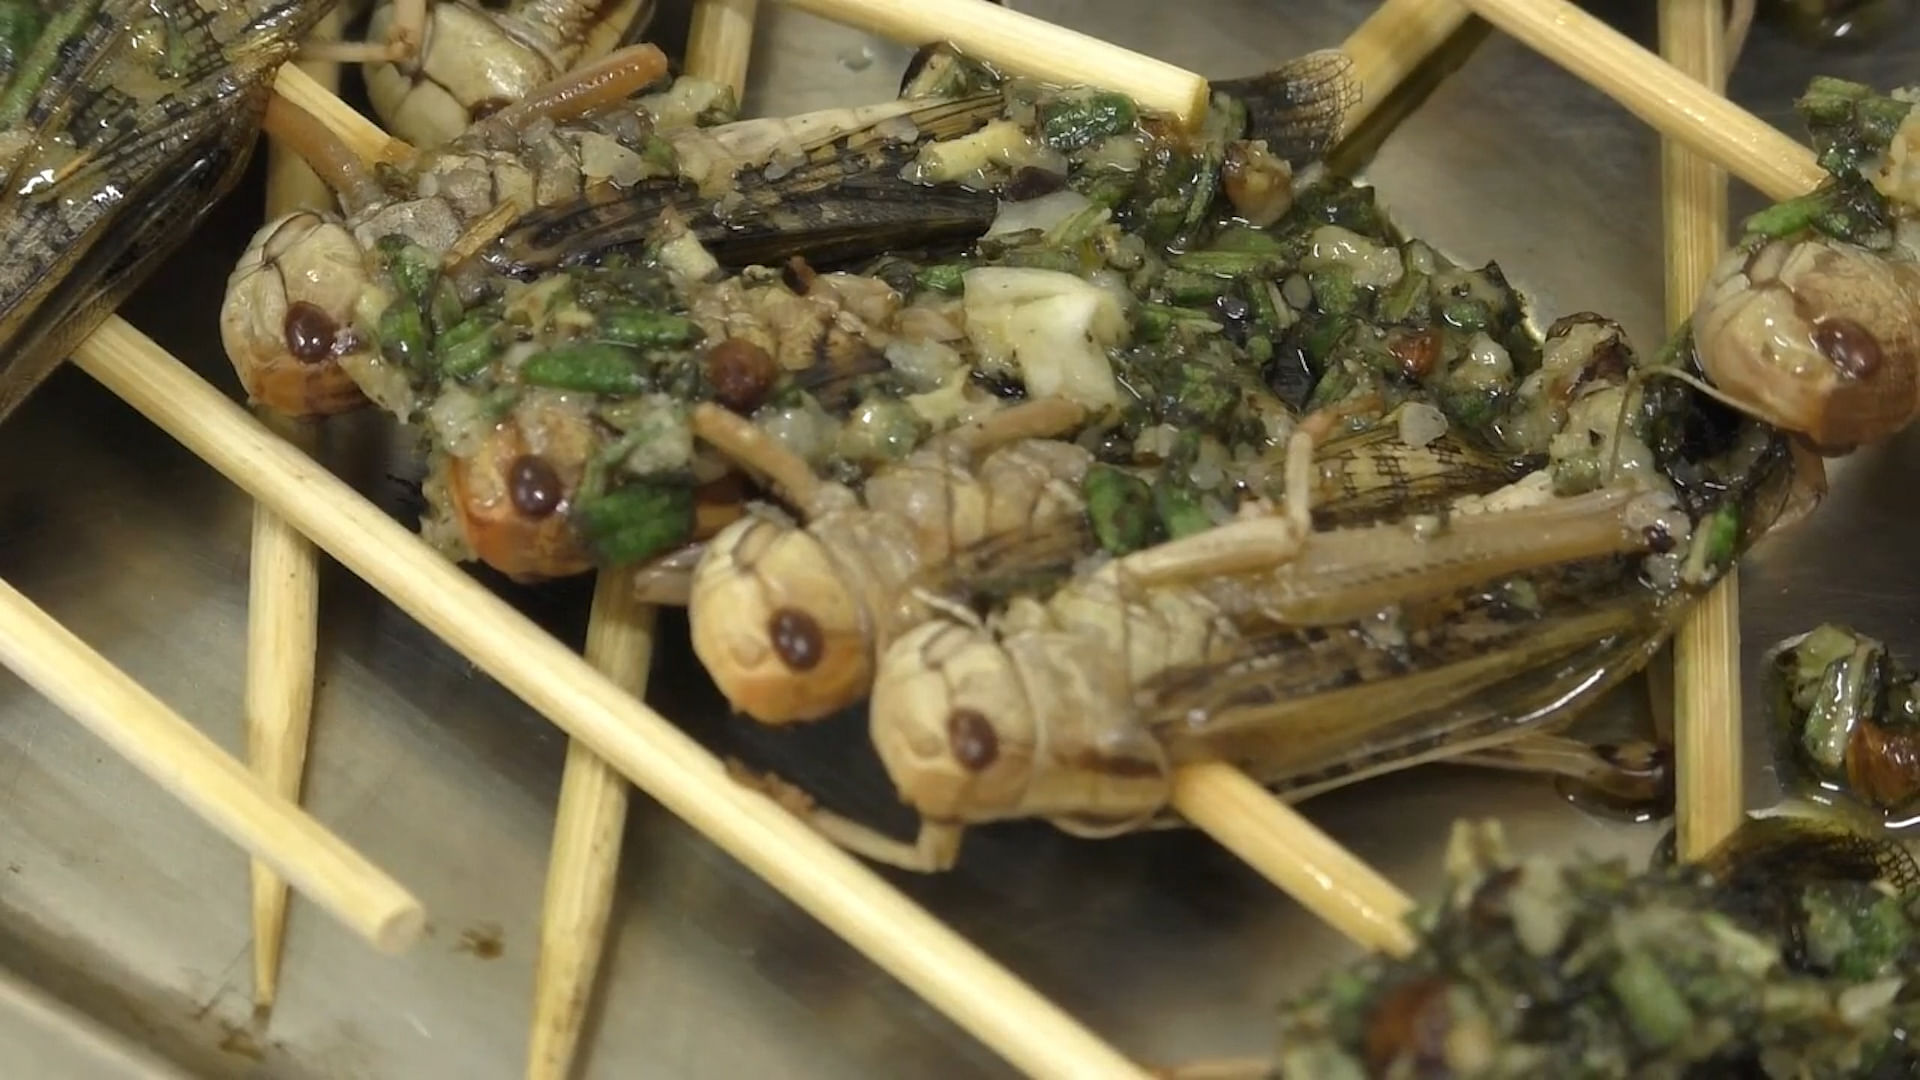 The restaurant serves a four-course meal... of insect dishes.&nbsp;